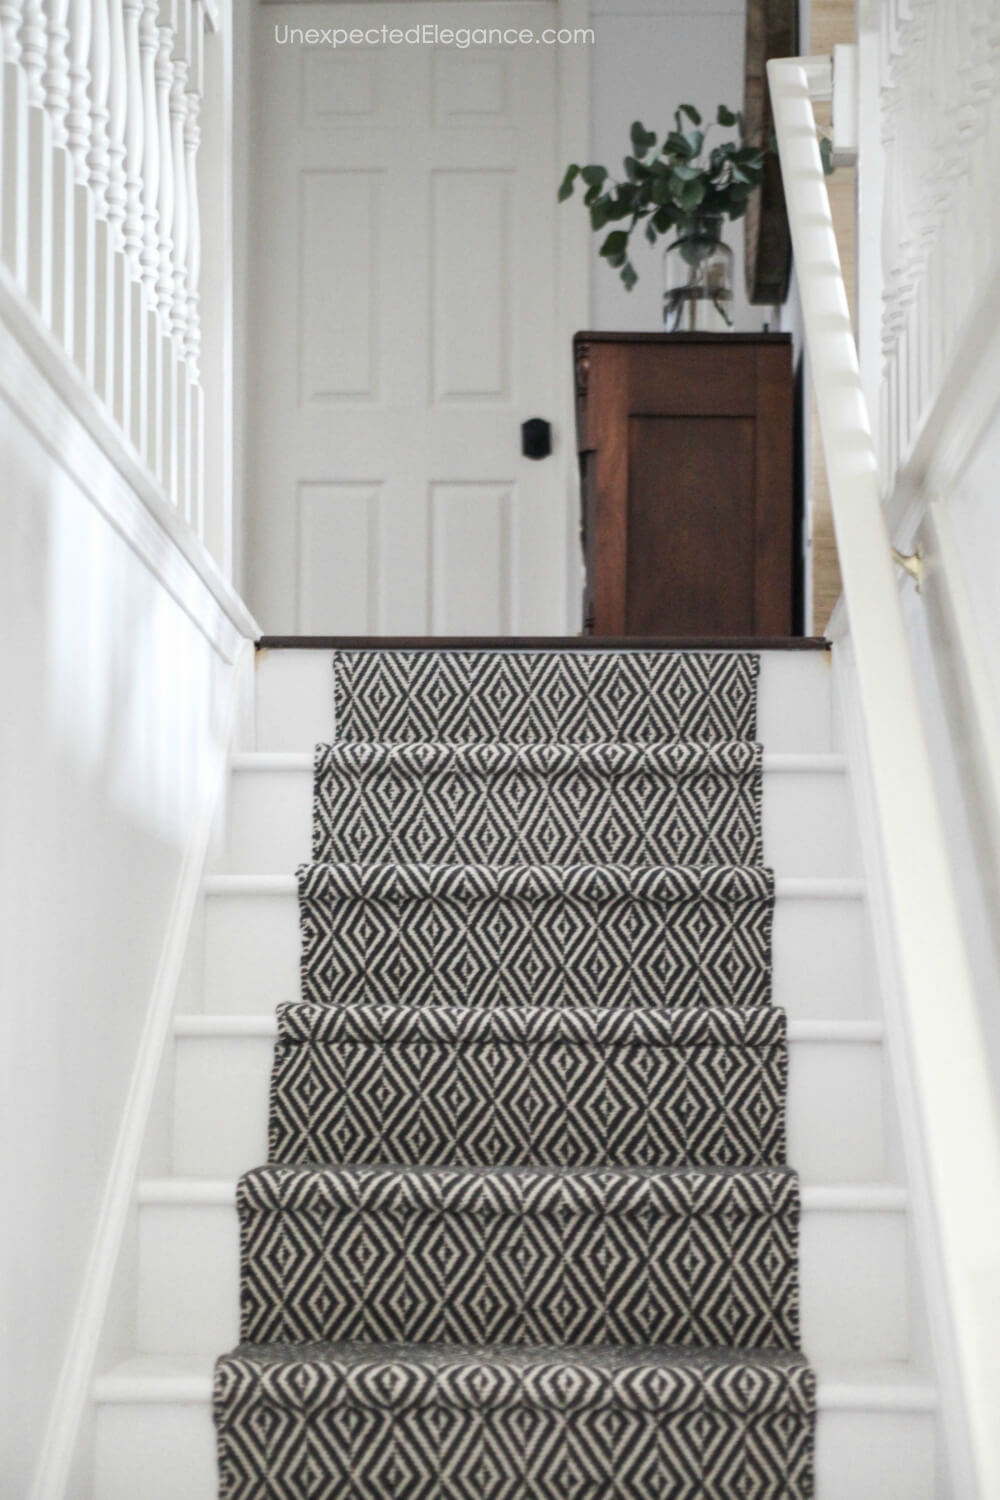 Check out this tutorial on how to replace your outdated carpet with an inexpensive stair runner.